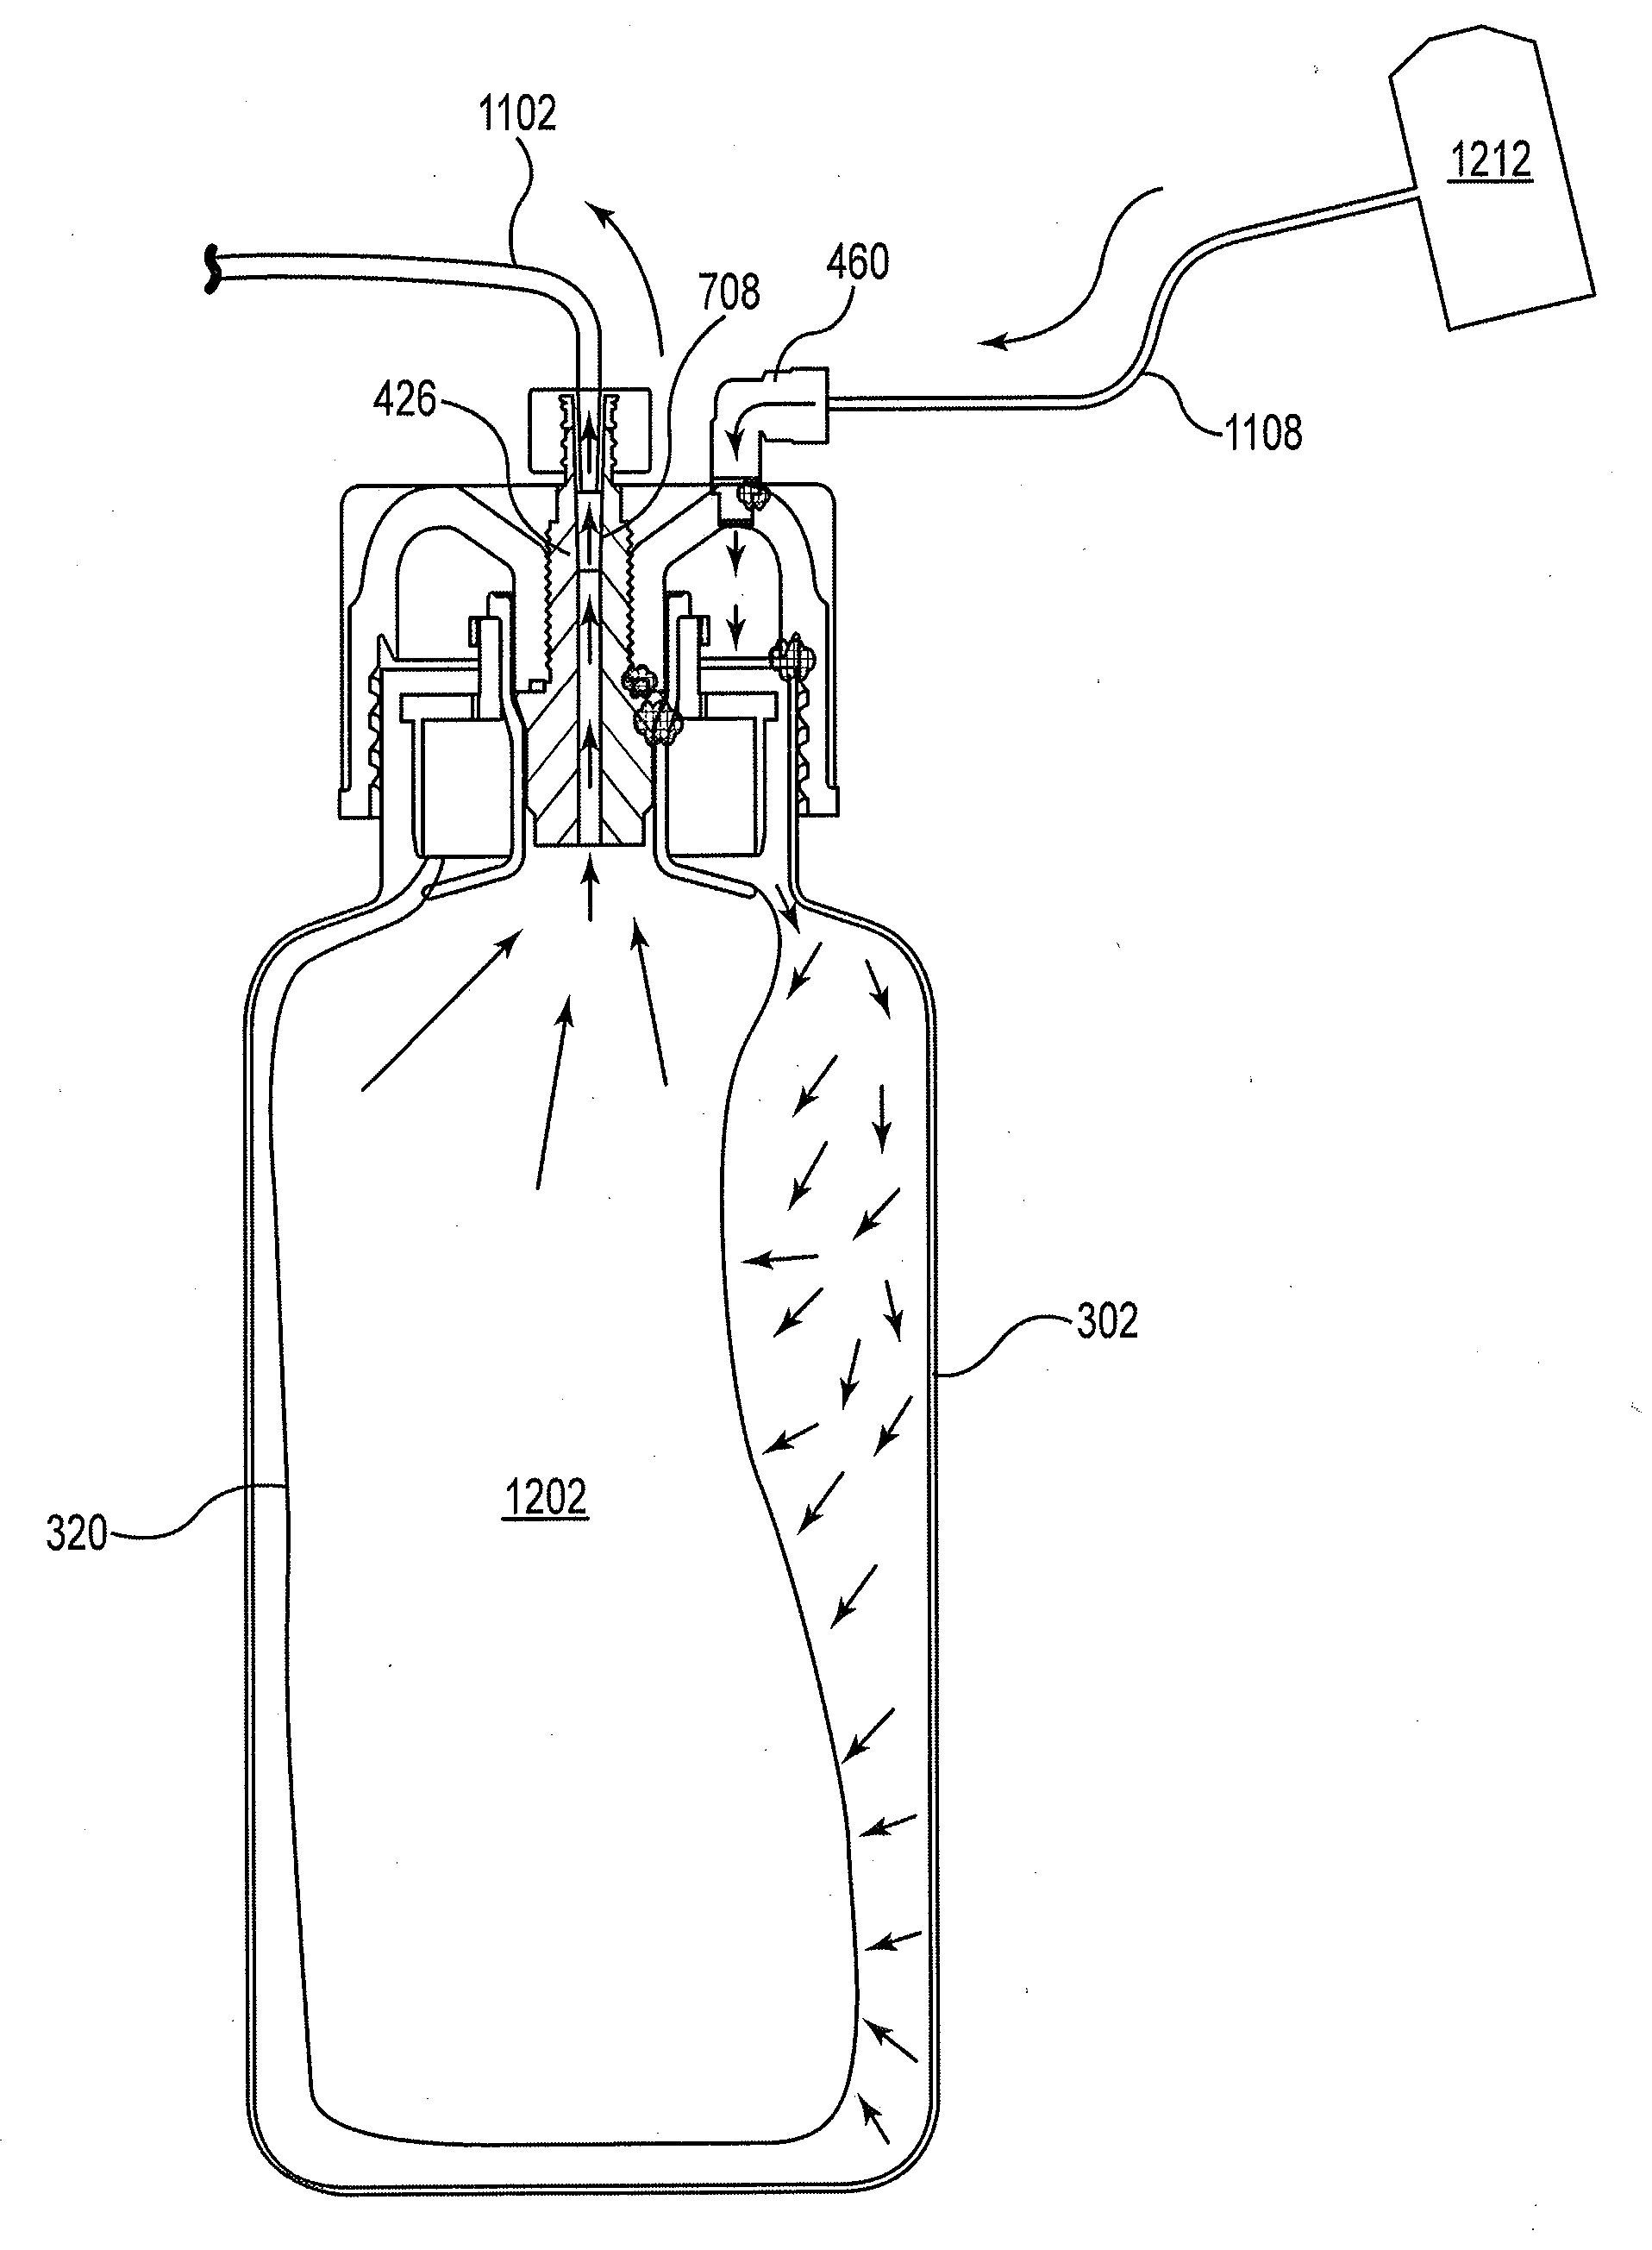 Closure/Connector for Liner-Based Dispense Containers